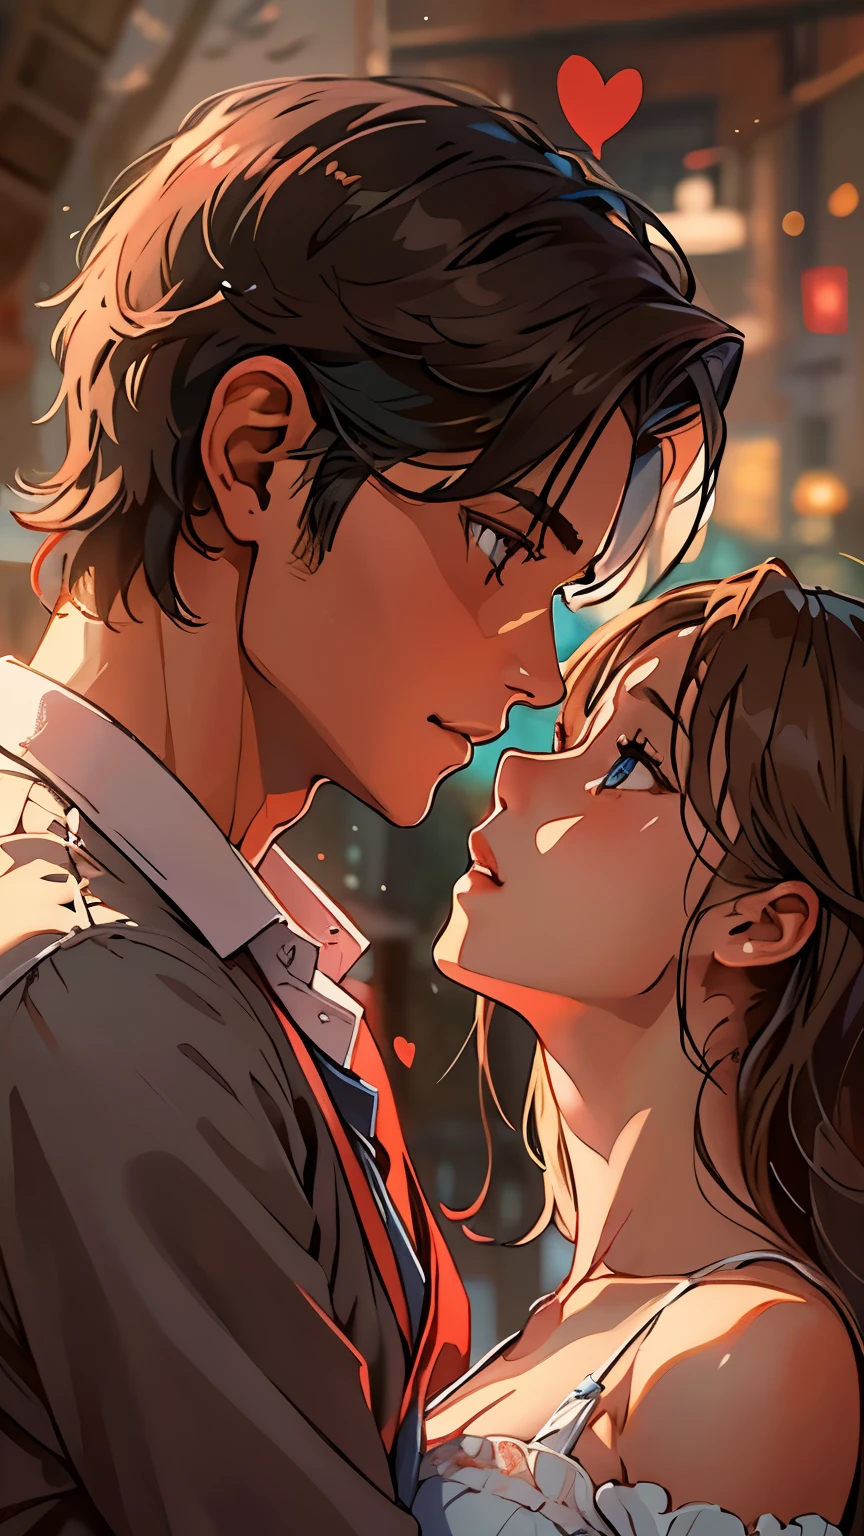 (Masterpiece, Best Quality), 1 girl, 1 boy embracing tightly, hearts beating in sync, (ambiguous, intimate), gazing deep into each other's eyes, their lips meeting in a passionate kiss, a beautiful couples' moment, a work of art,

(High quality, 1 girl), Brown haired beauty with a collared shirt, her eyes sparkling with shyness, leaning slightly backward, Handsome man approaching her, untying the collar of her shirt, revealing a deep V neckline and ample cleavage, the smell of her perfume intoxicing him,

(Sensuous masterpiece), A pretty, charming Coquettish girl with